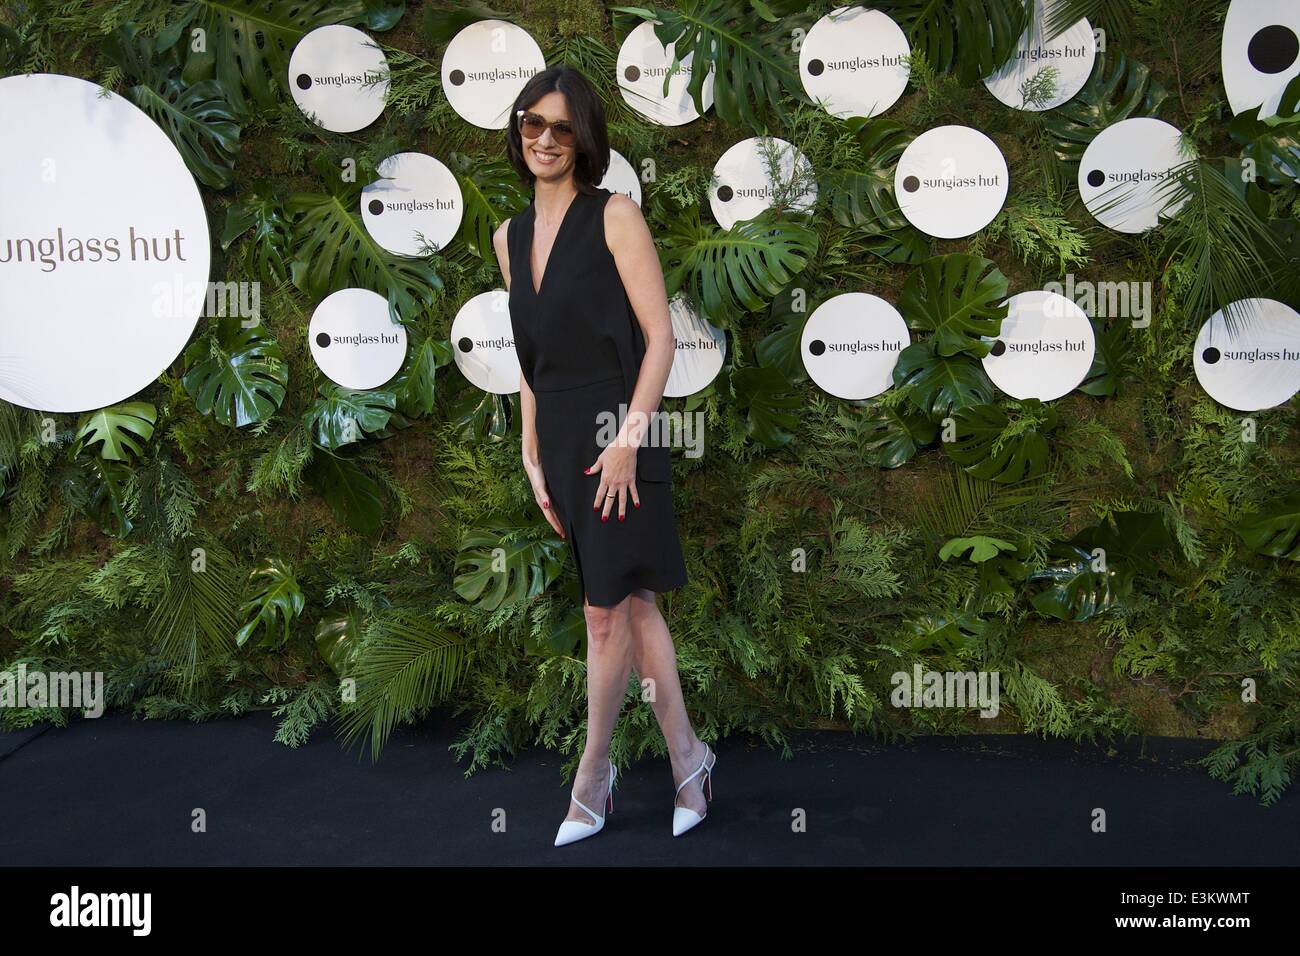 Madrid, Madrid, Spain. 24th June, 2014. Paz Vega attends 'House of Sun' Pop-Up Boutique Opening on June 24, 2014 in Madrid, Spain. Credit:  Jack Abuin/ZUMAPRESS.com/Alamy Live News Stock Photo